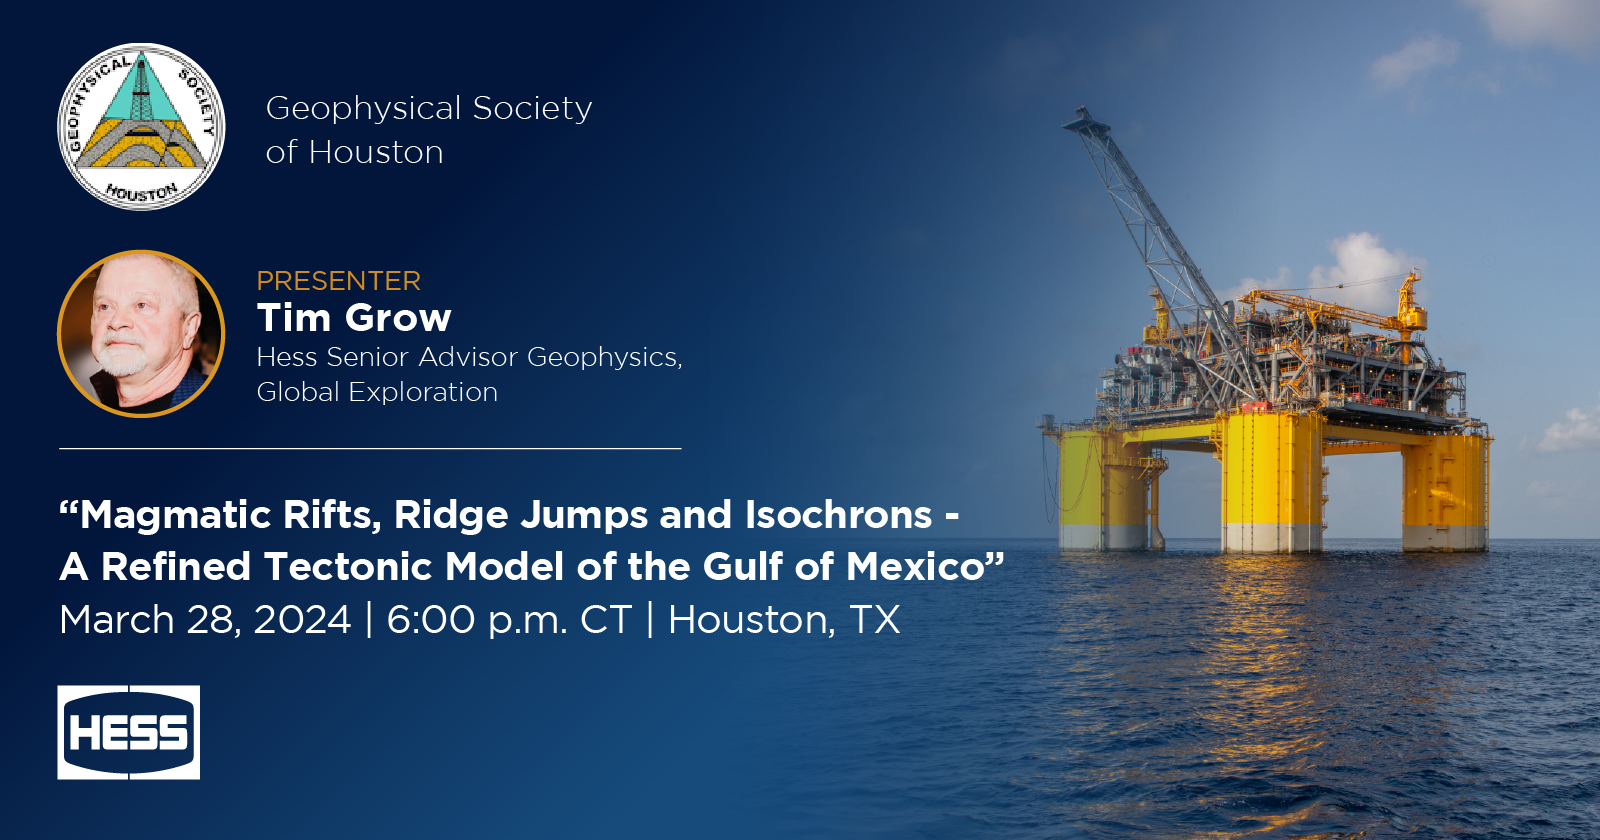 Tim Grow to Present at Geophysical Society of Houston Dinner